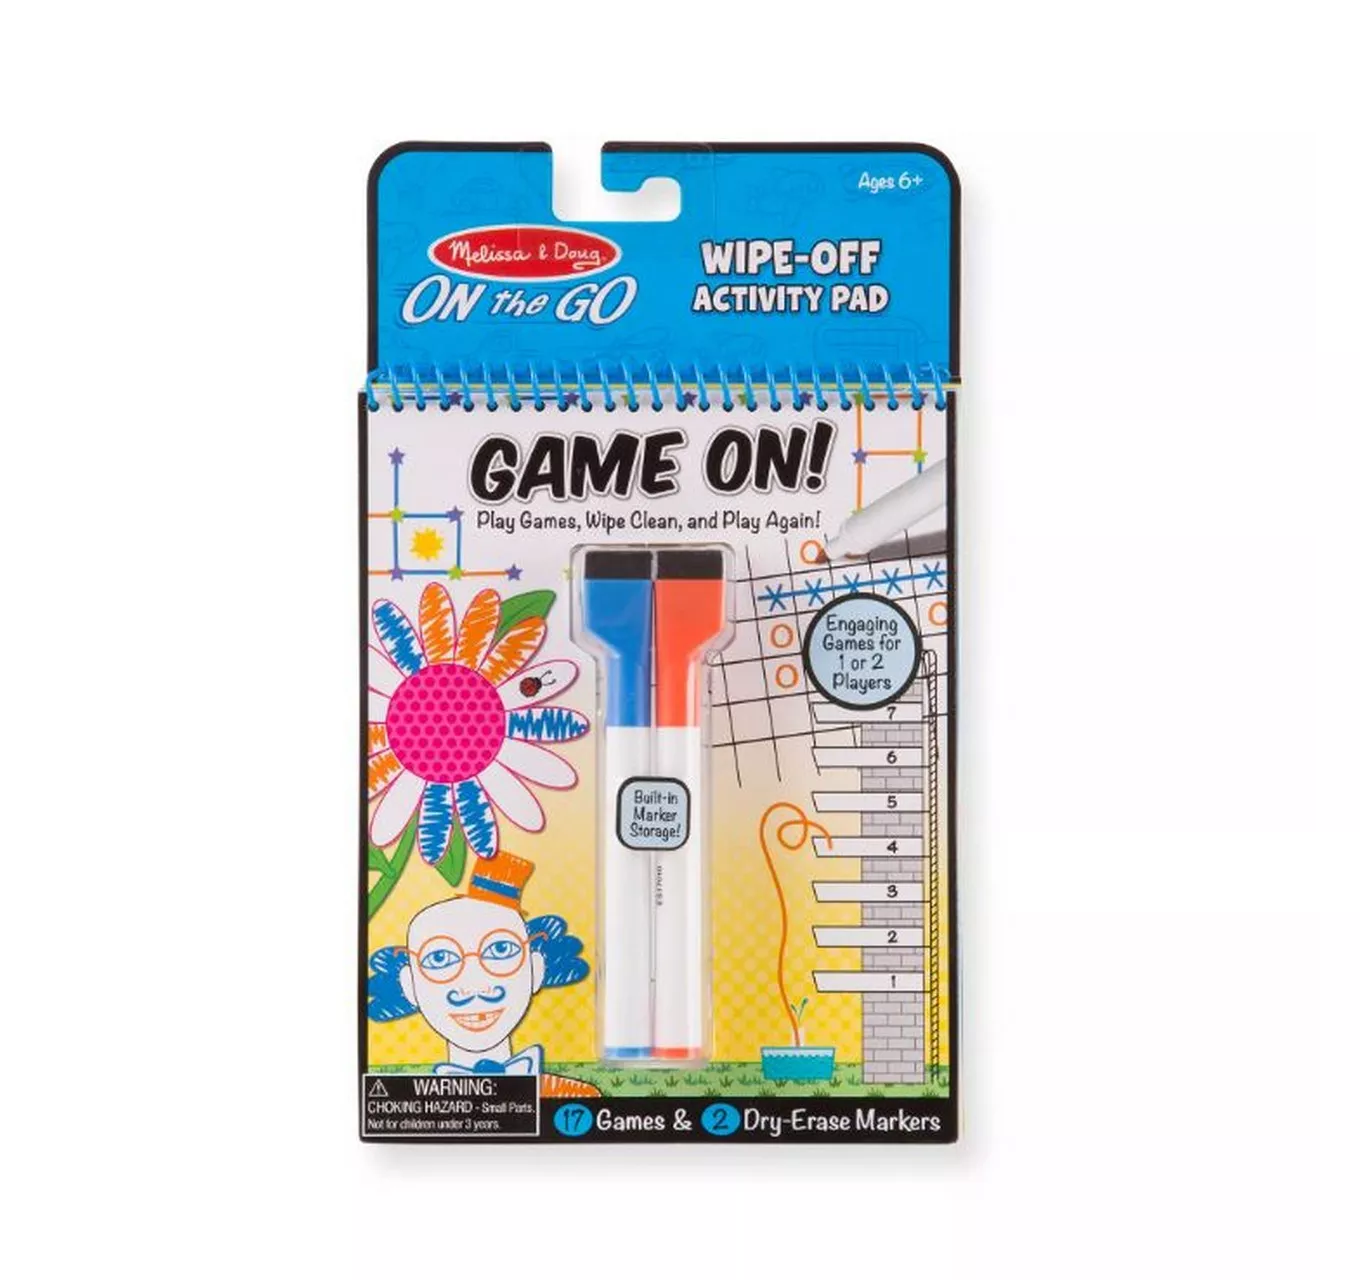 Wipe-Off Activity Pad Game On